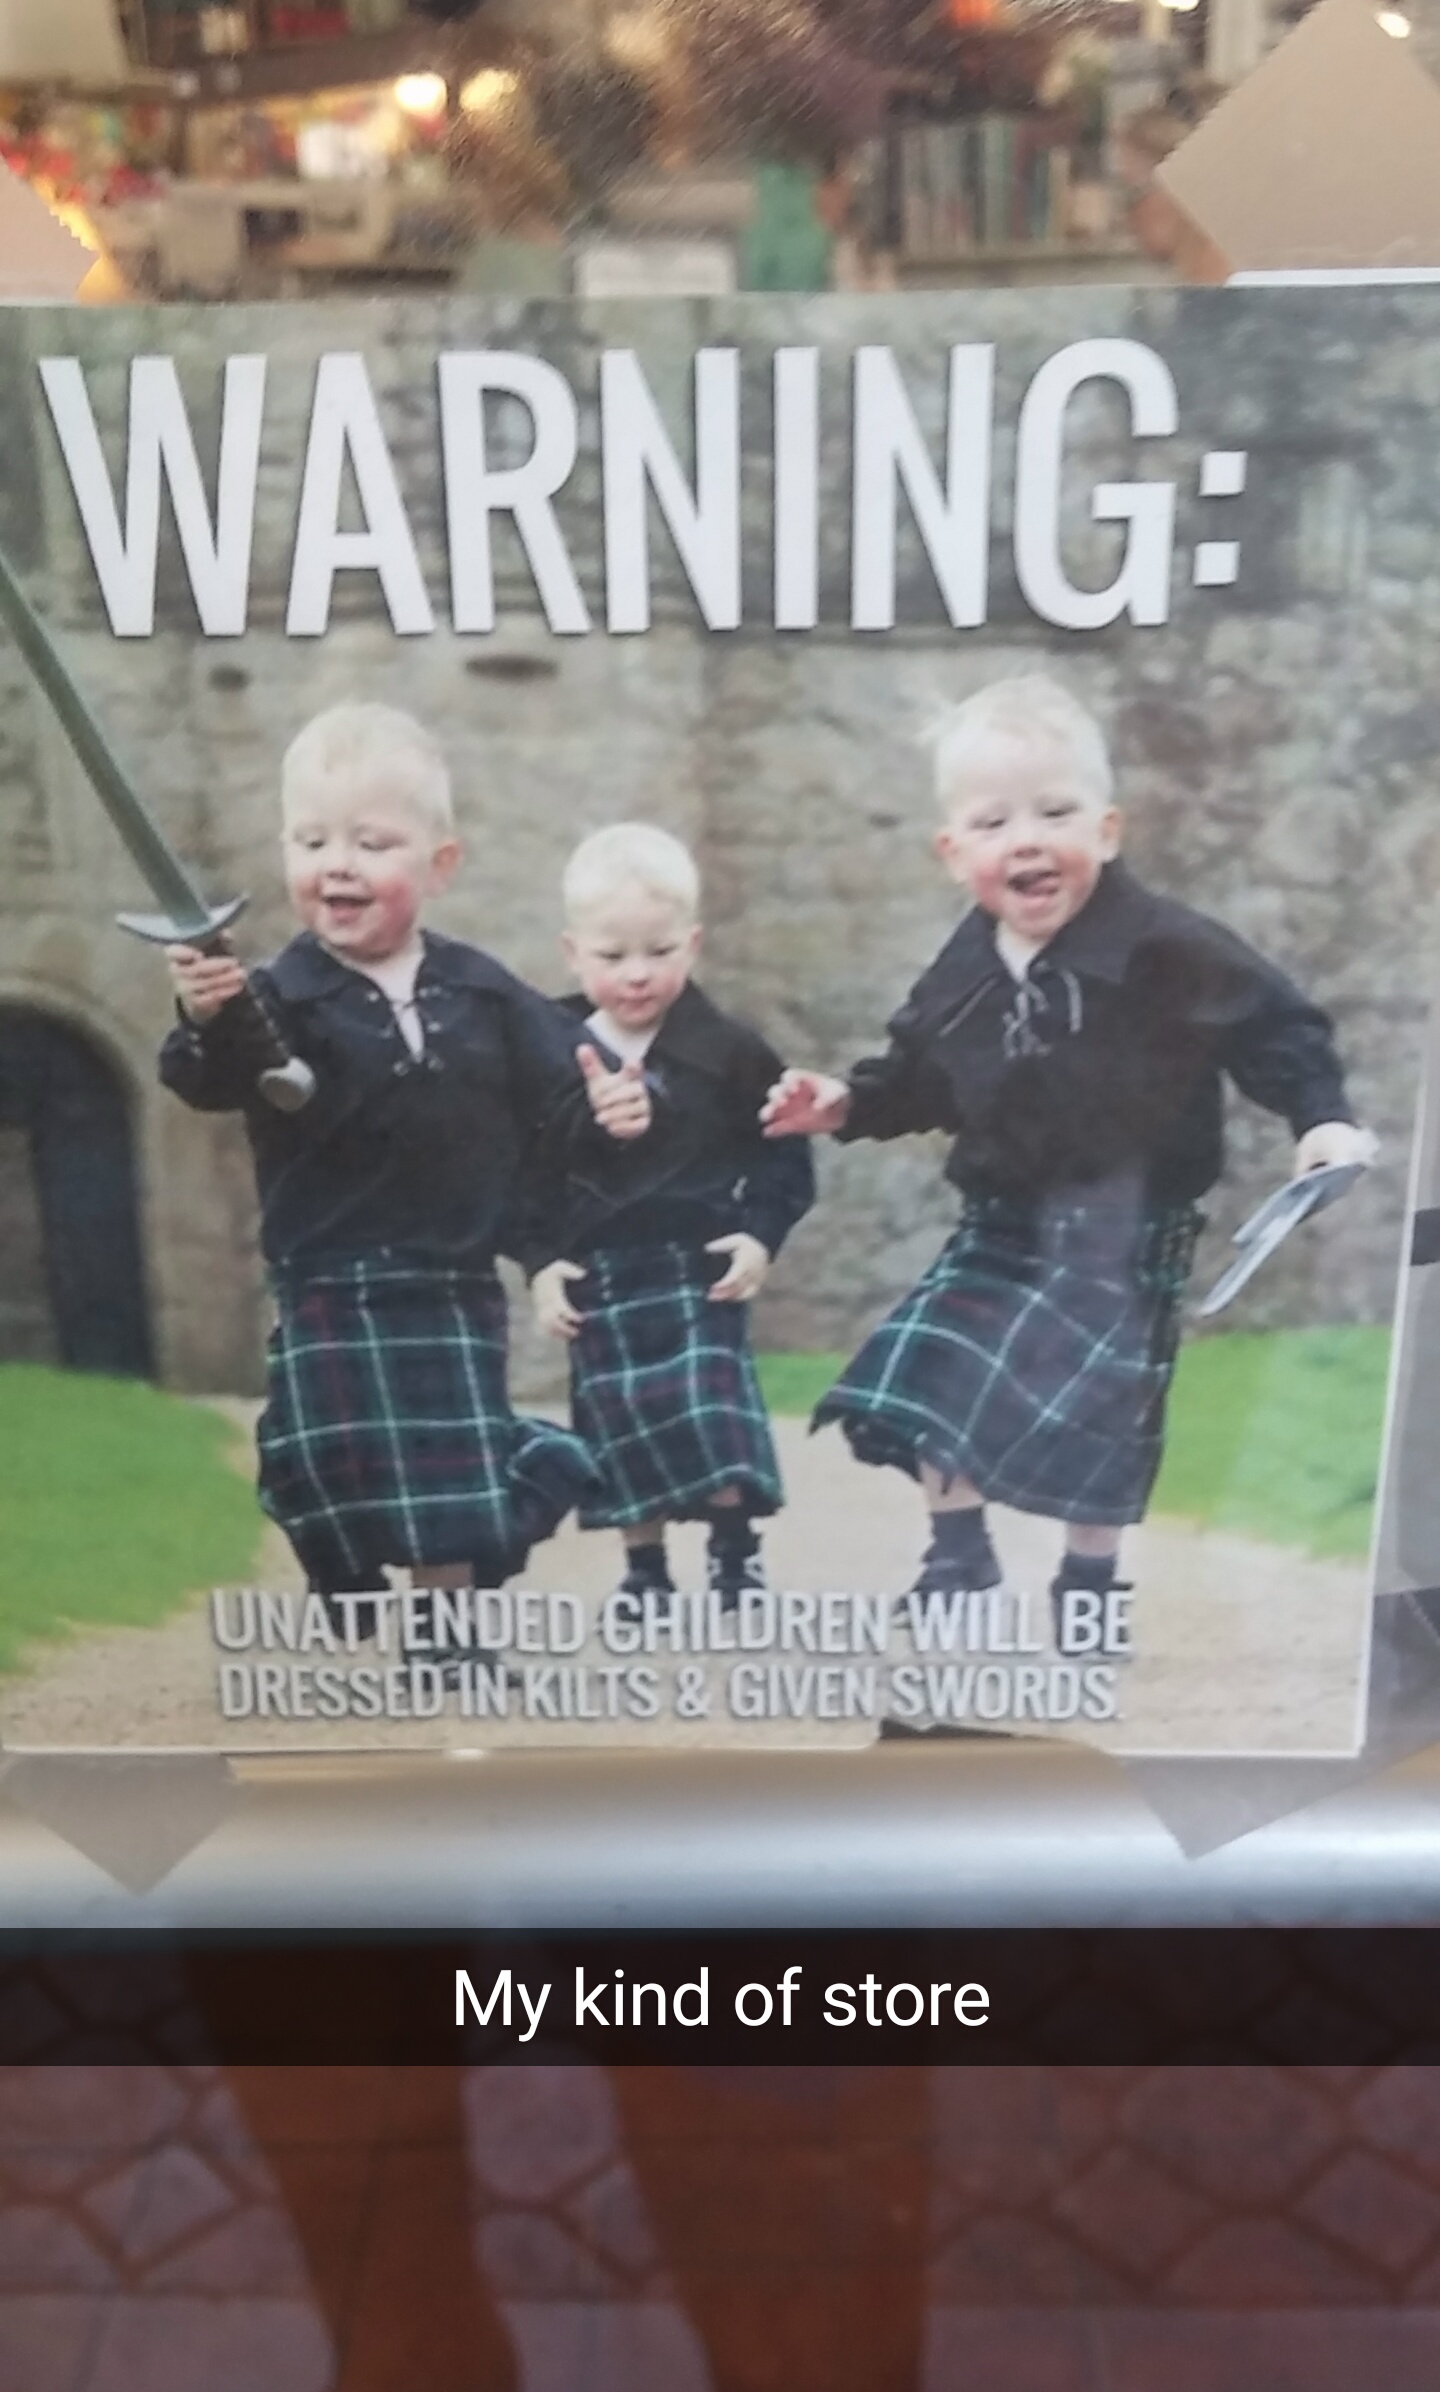 random pic unattended children will be given swords and kilts - Warning Unattended Children Will Be Dressed In Kilts & Given Swords My kind of store